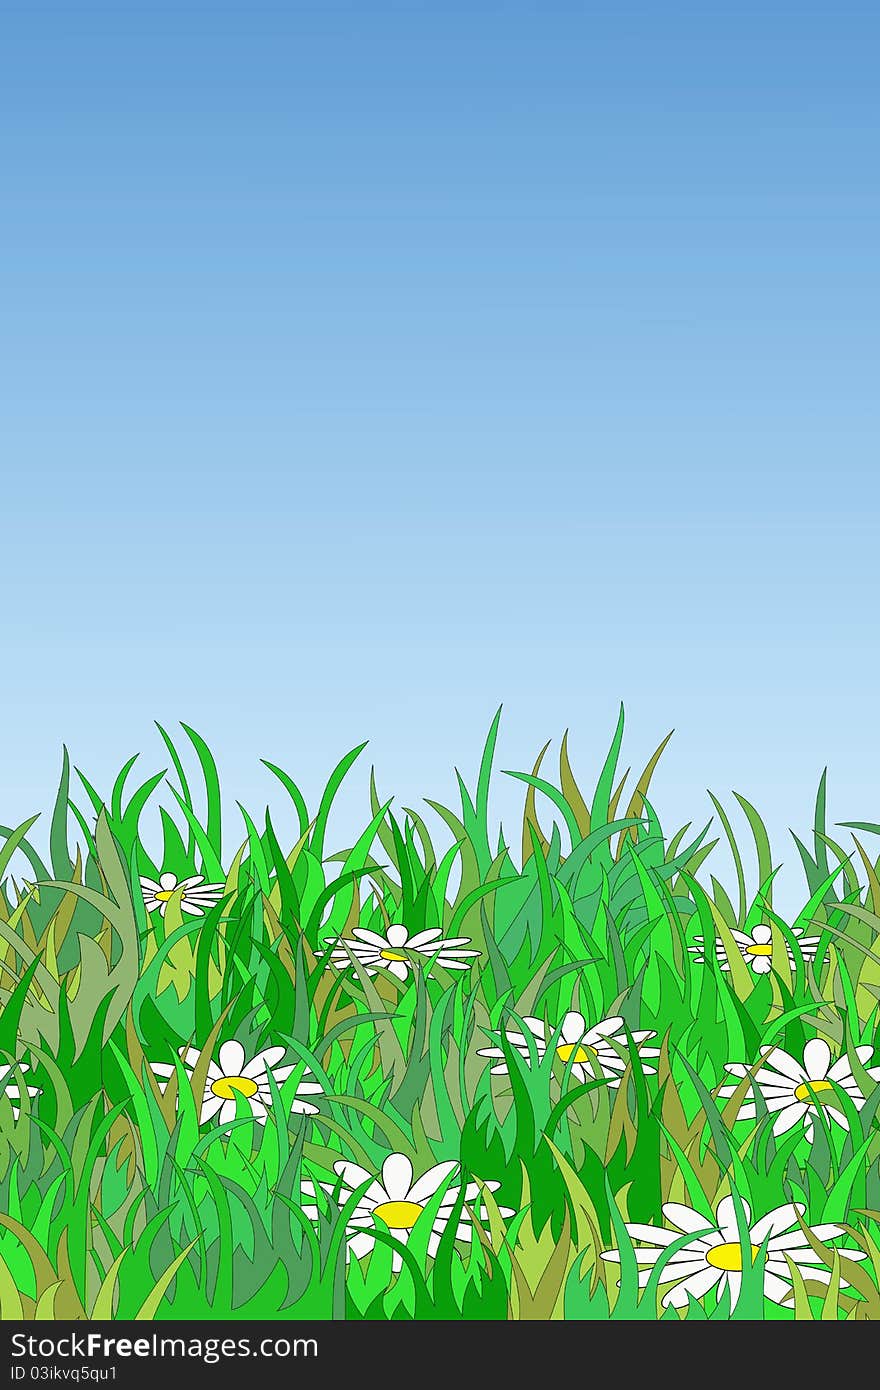 Chamomiles in grass with free space for your text (seamless). Chamomiles in grass with free space for your text (seamless)